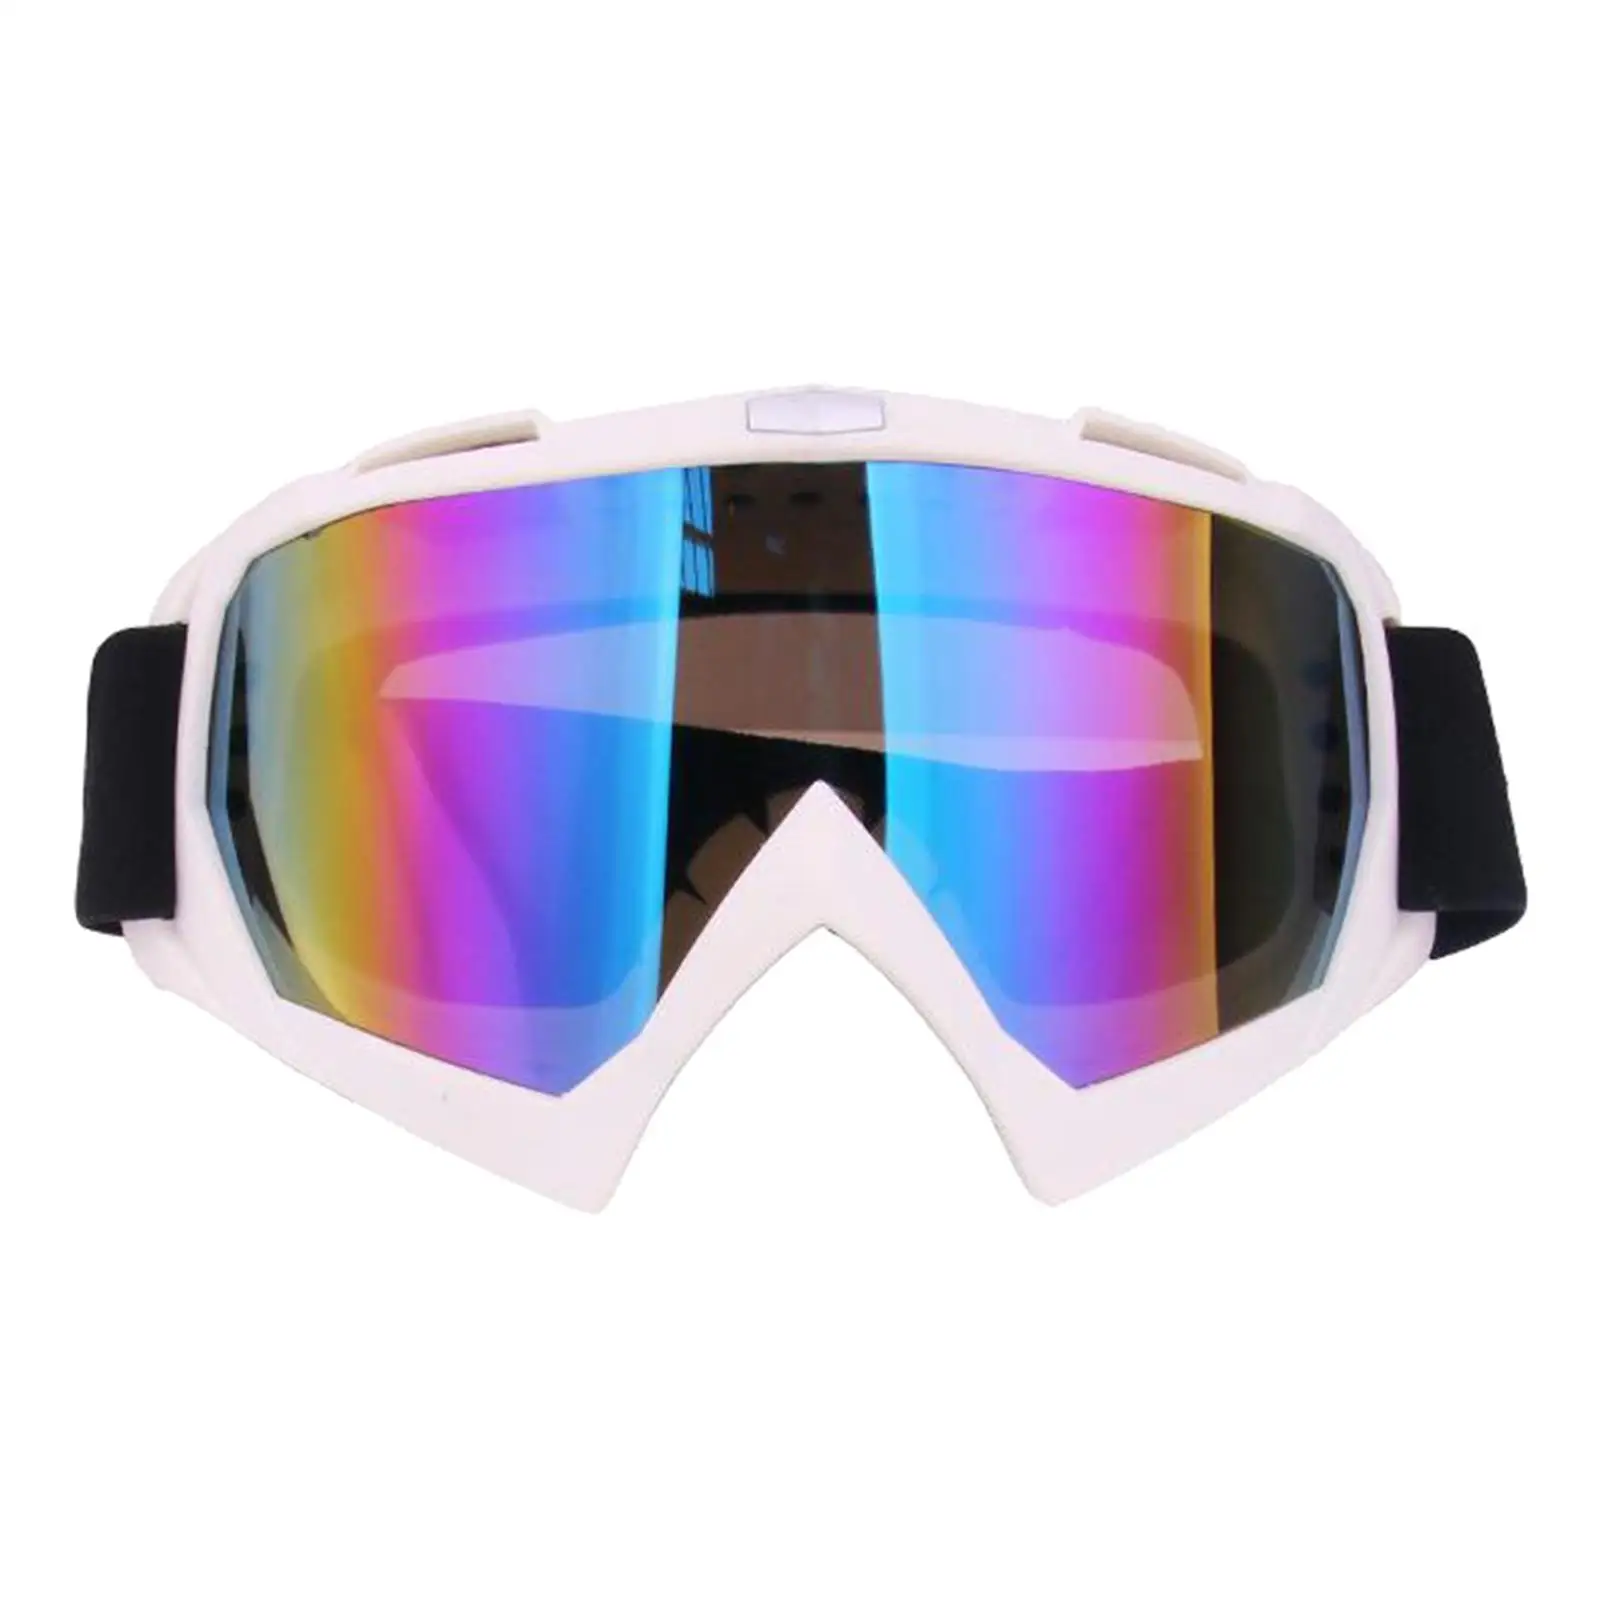 Snowmobile Skiing Safety Goggles Windproof Glasses Climbing Motorcycle Goggles,